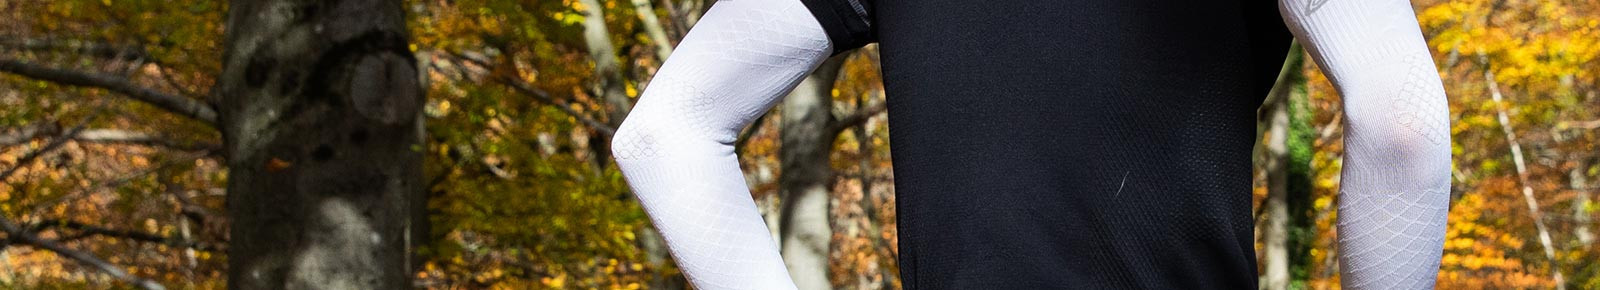 Compression arm sleeves for sports | BV SPORT